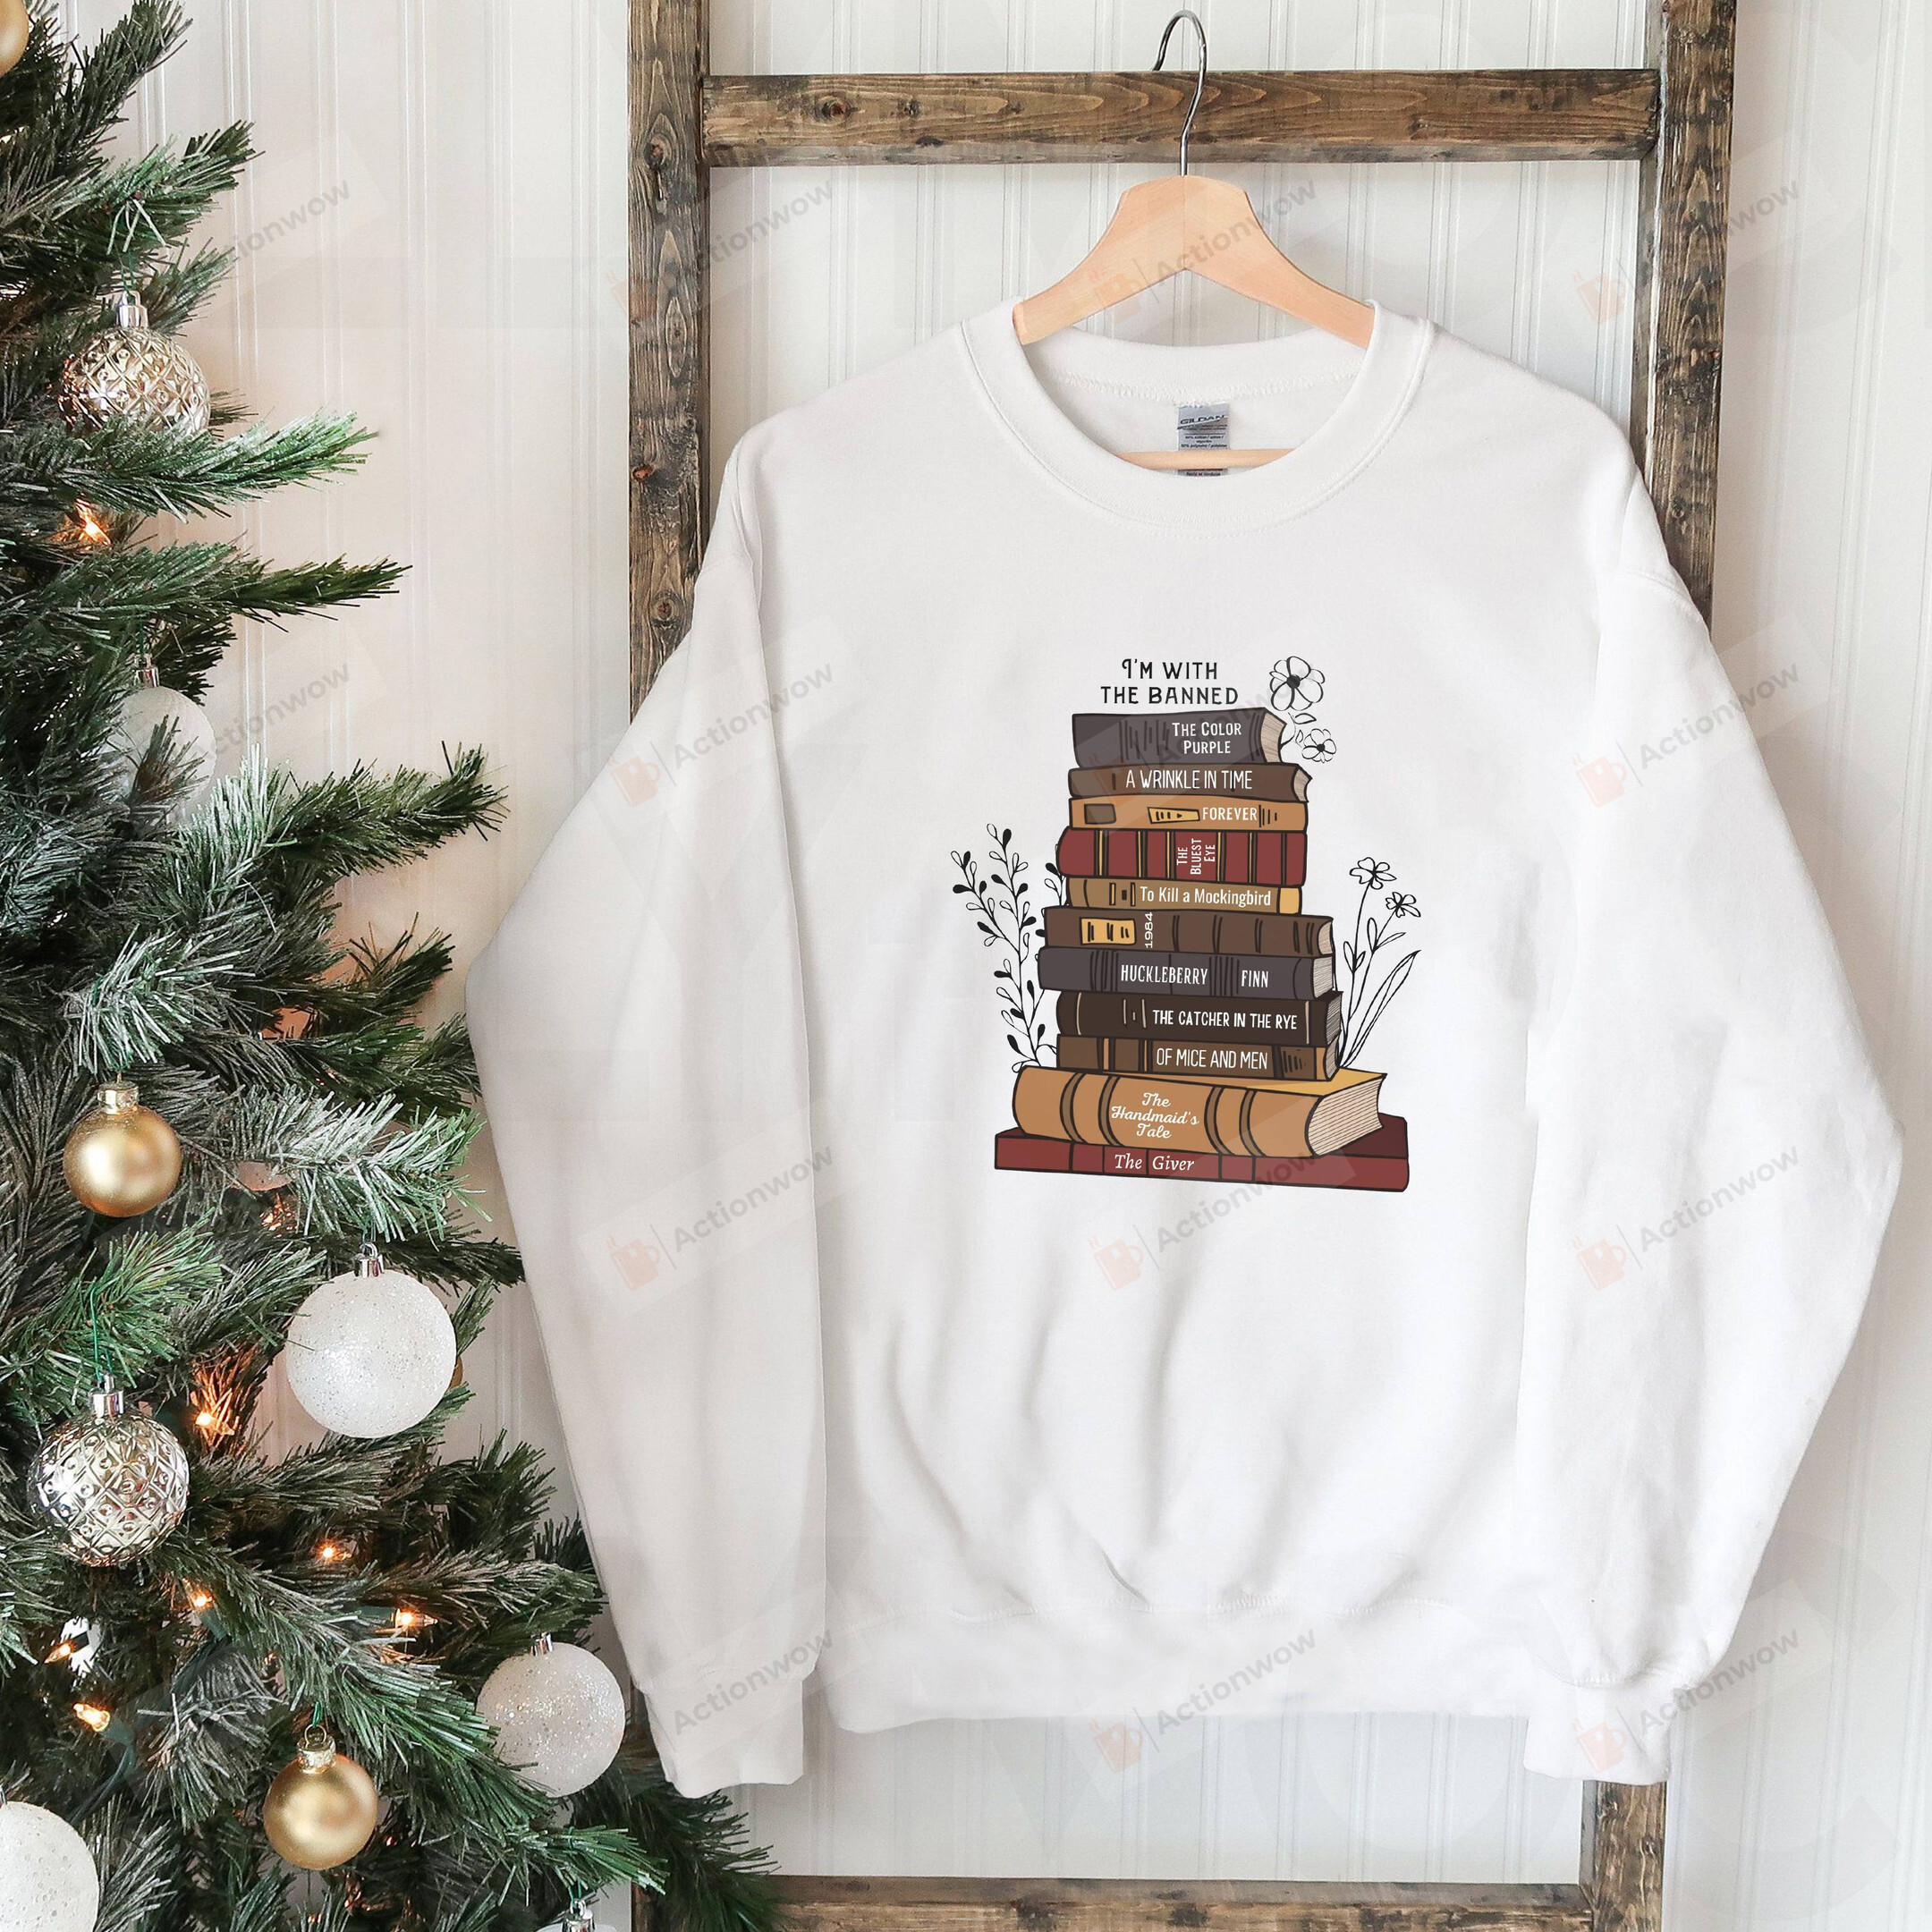 Vintage I'm With The Banned Sweatshirt, Xmas Holiday Christmas Shirt For Book Lovers, Bookworm Librarian Gifts, Bookish Shirt